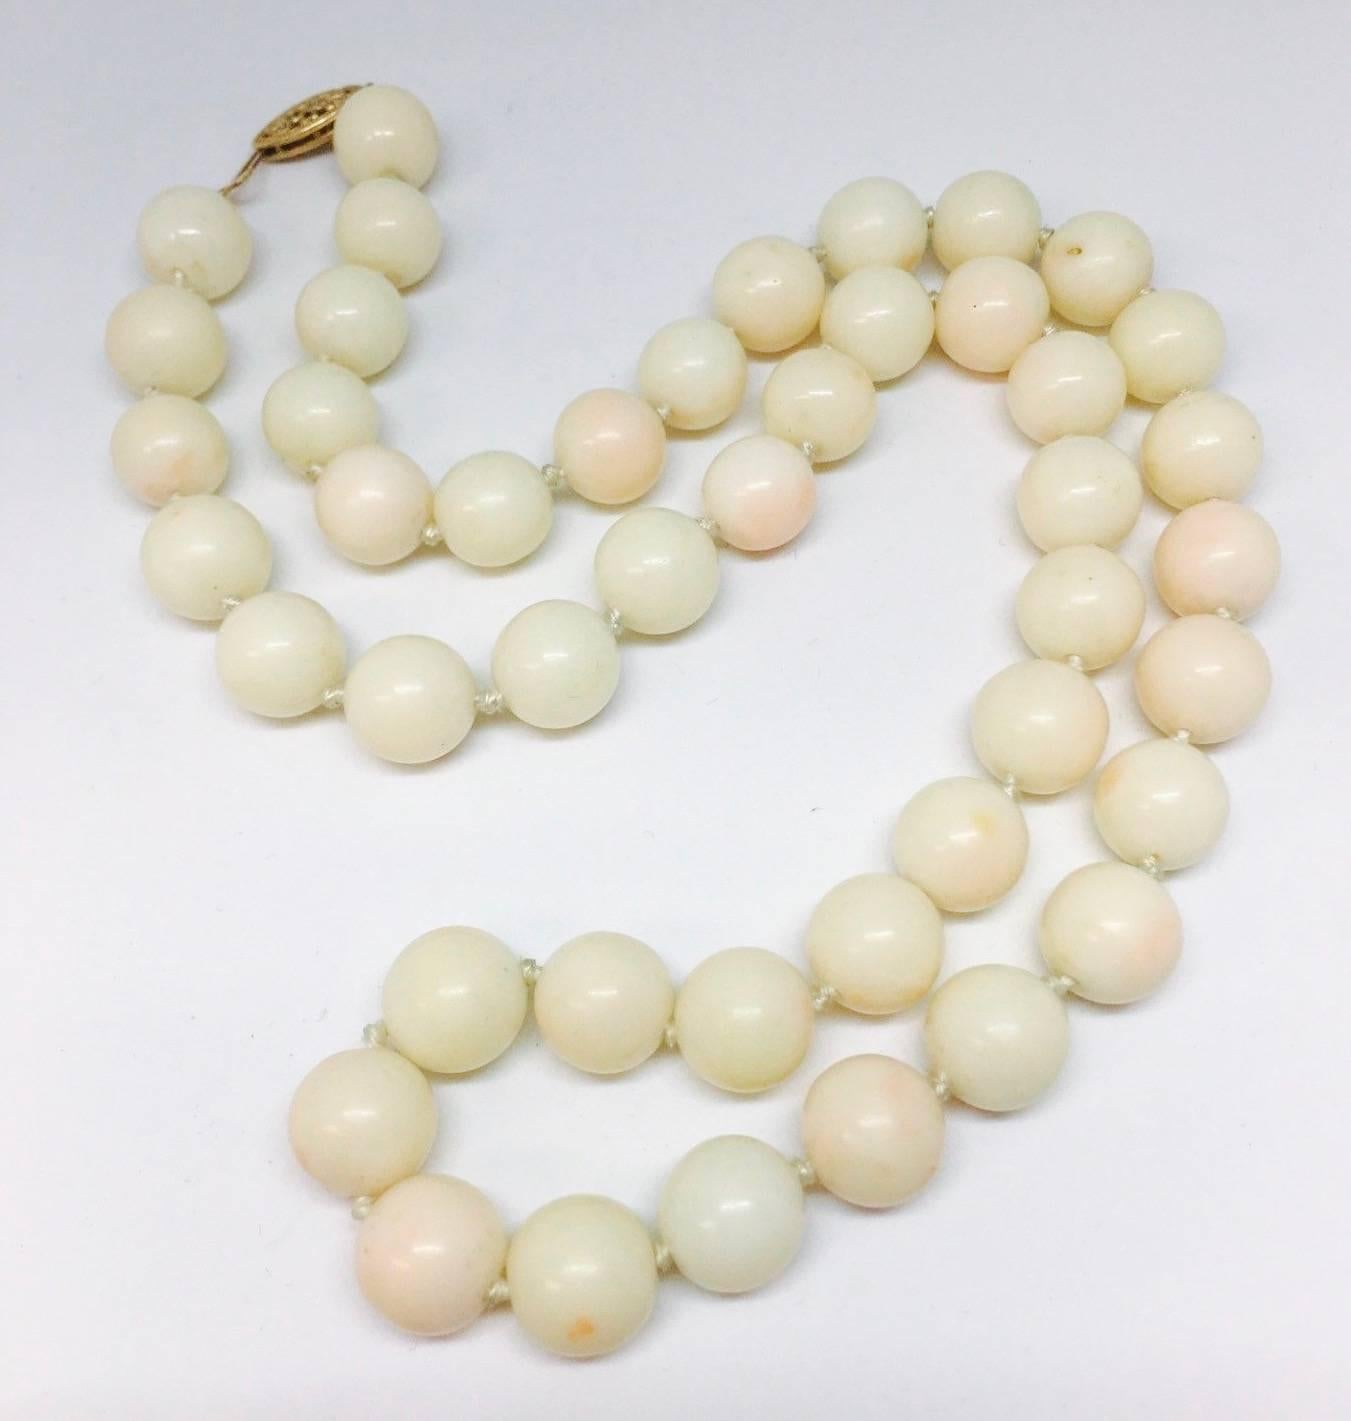 Beautiful 14k gold angel skin coral beaded necklace set with sizable 10mm beads and reaching a princess length of approximately 20".  A striking necklace on the neck, this beautiful strand of pale peachy pink coral beads features natural